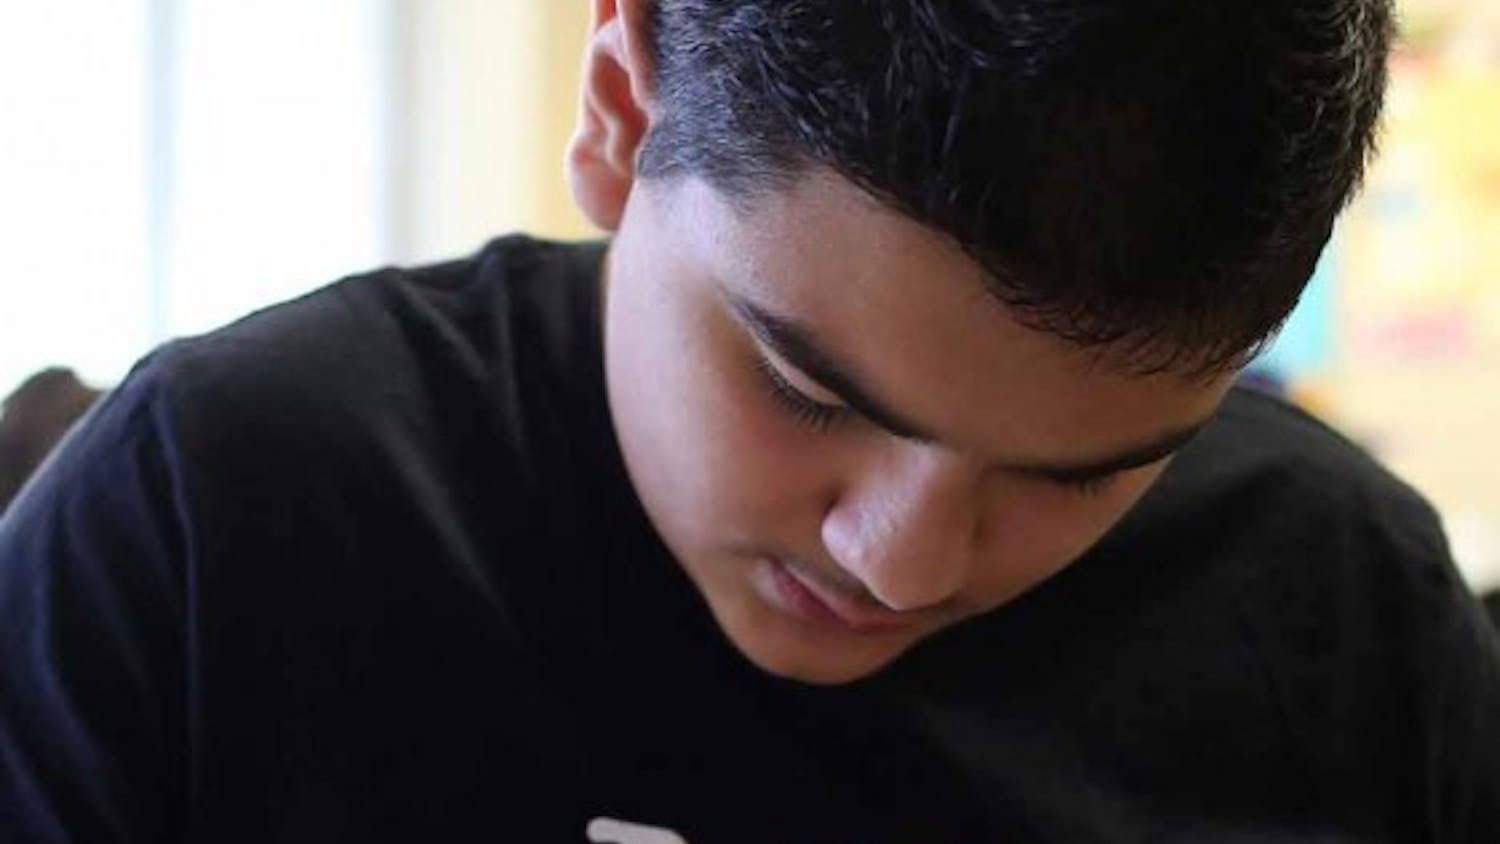 Rakan, 13, studies in first-period math at Belzer Middle School in Lawrence, Ind. on Nov. 2. He teams up with Faris, his friend at school who also speaks Arabic. Rakan helps translate for Faris even though they both know very little English. 